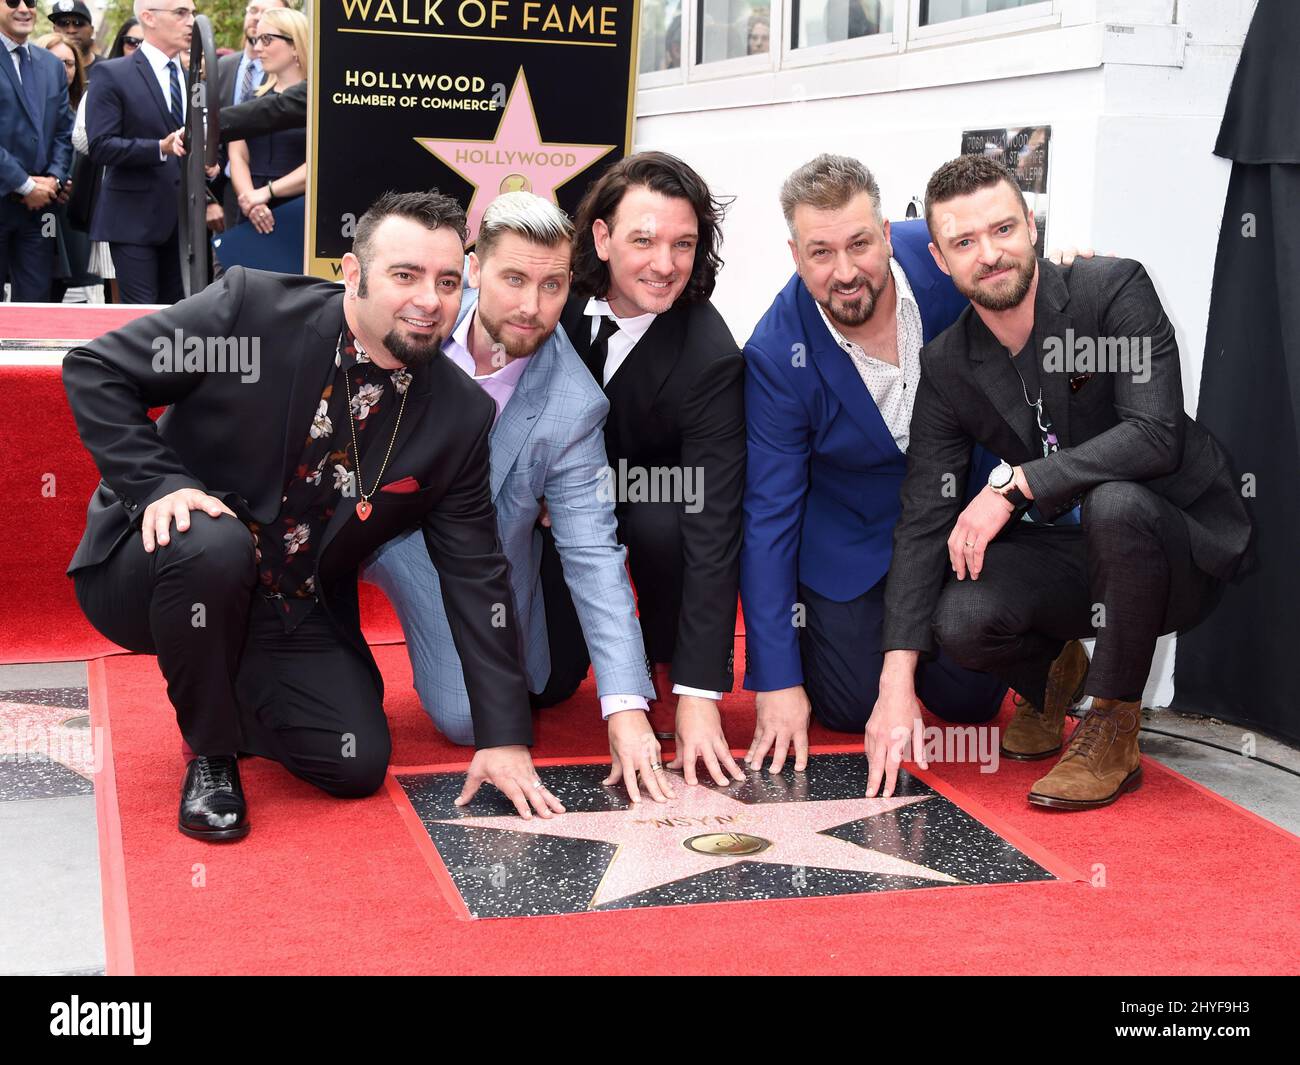 NSYNC, Chris Kirkpatrick, Joey Fatone, JC Chasez, Justin Timberlake and Lance Bass at NSYNC's Hollywood Walk of Fame star ceremony on Hollywood Blvd near LaBrea on April 30, 2018 in Hollywood, CA. Stock Photo